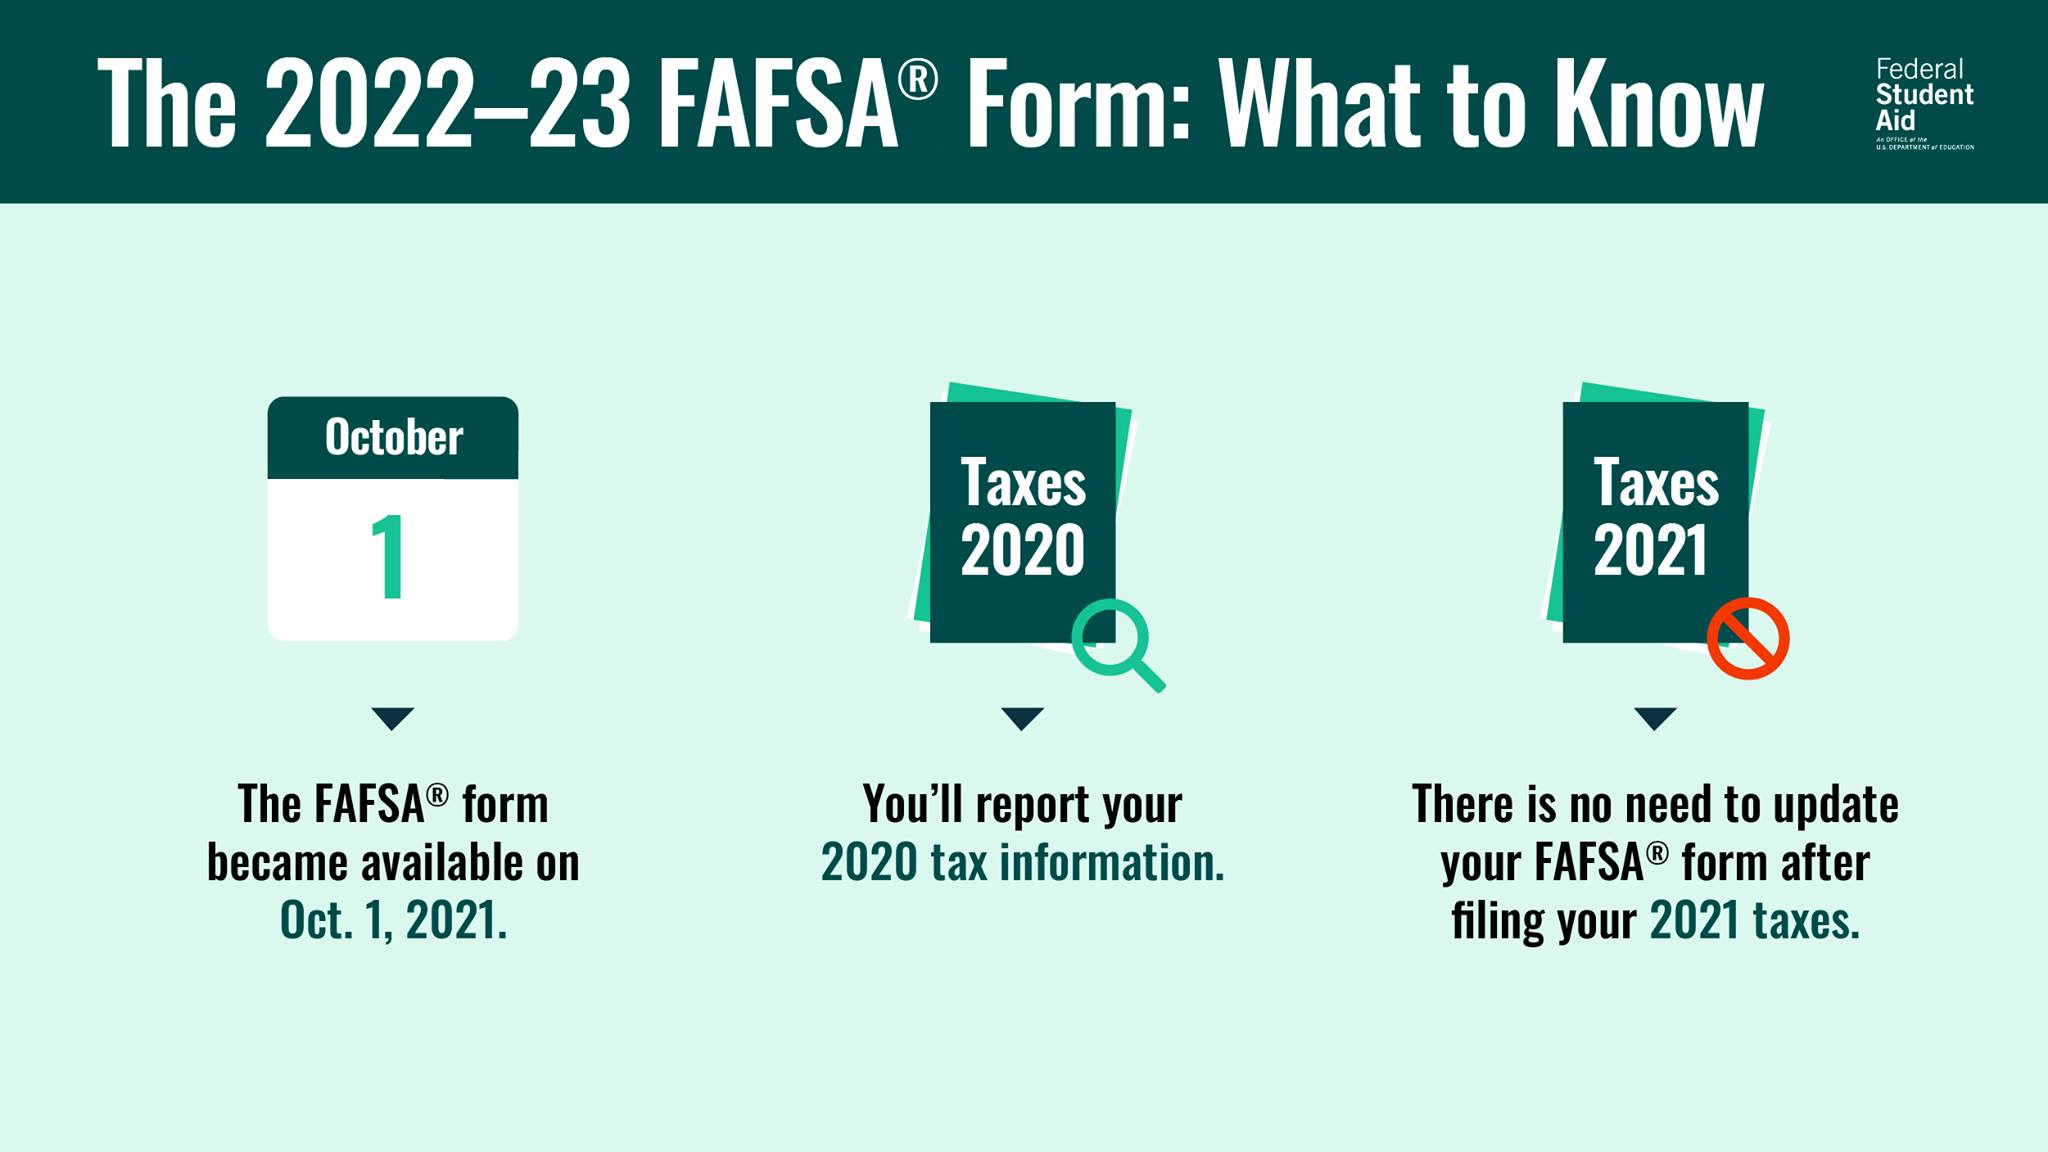 The FAFSA launches October 1